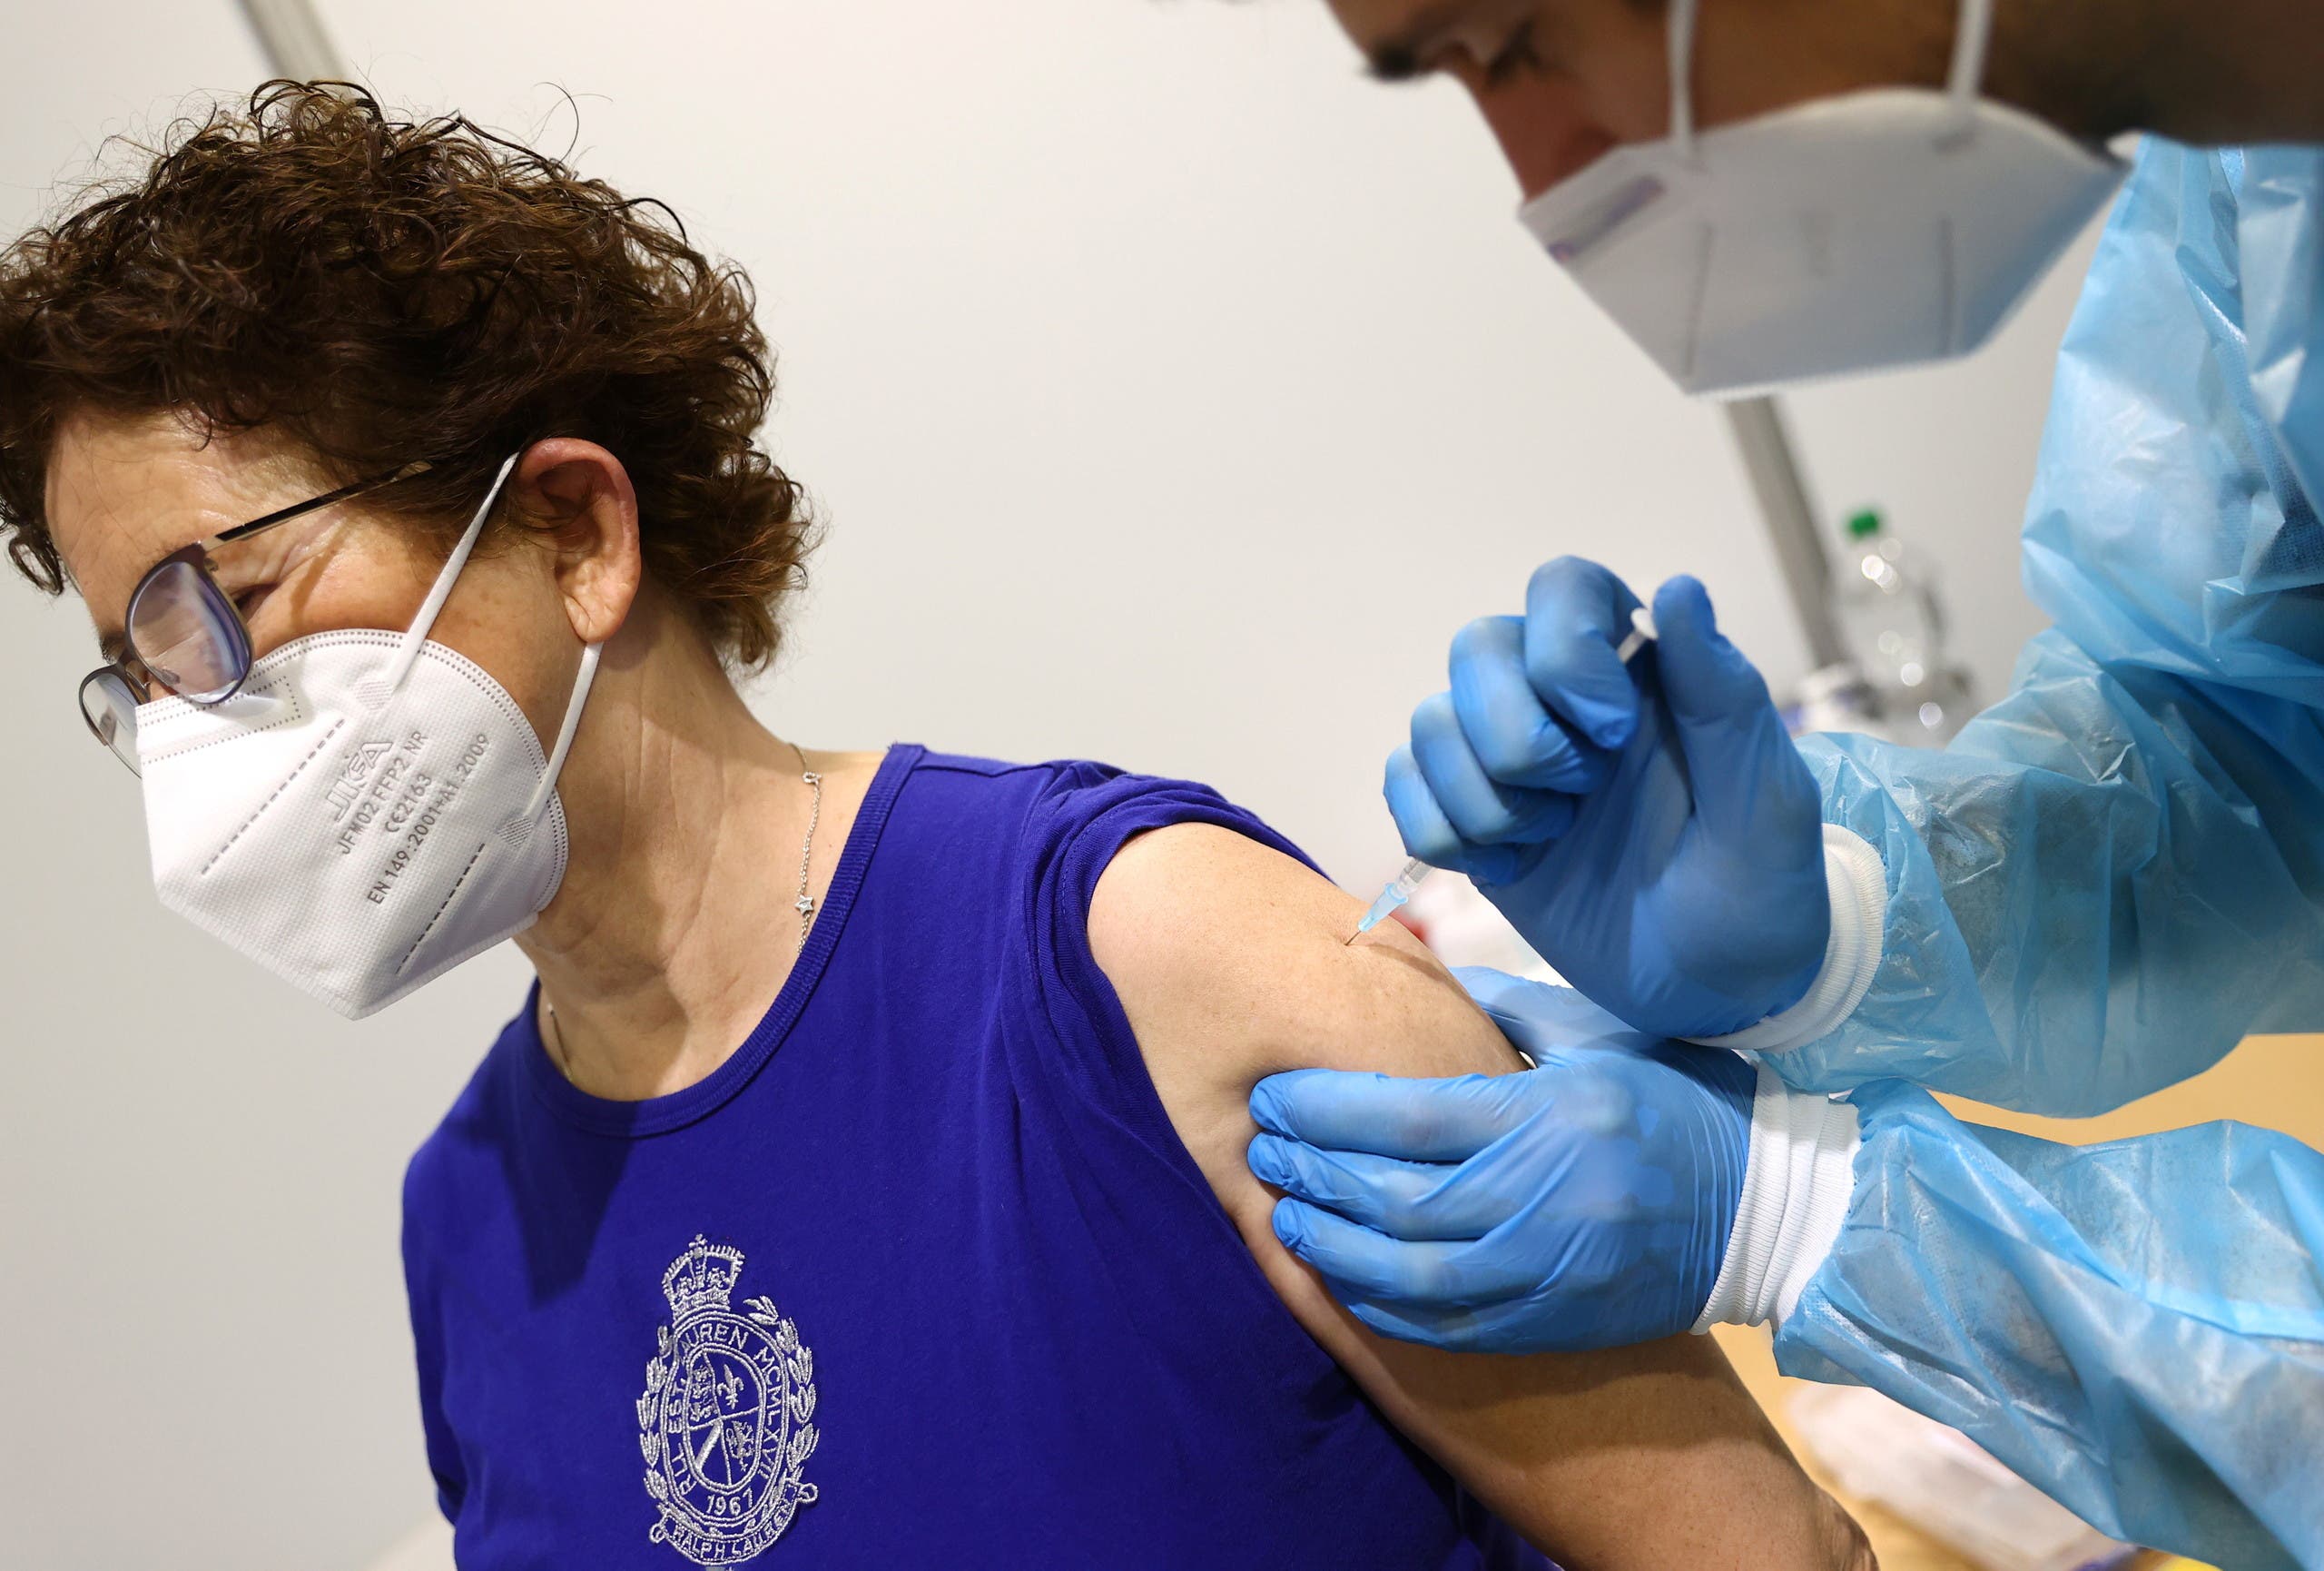 A woman gets her AstraZeneca COVID-19 vaccine at the local vaccination centre as the spread of the coronavirus disease (COVID-19) continues in Hagen, Germany. (Reuters)